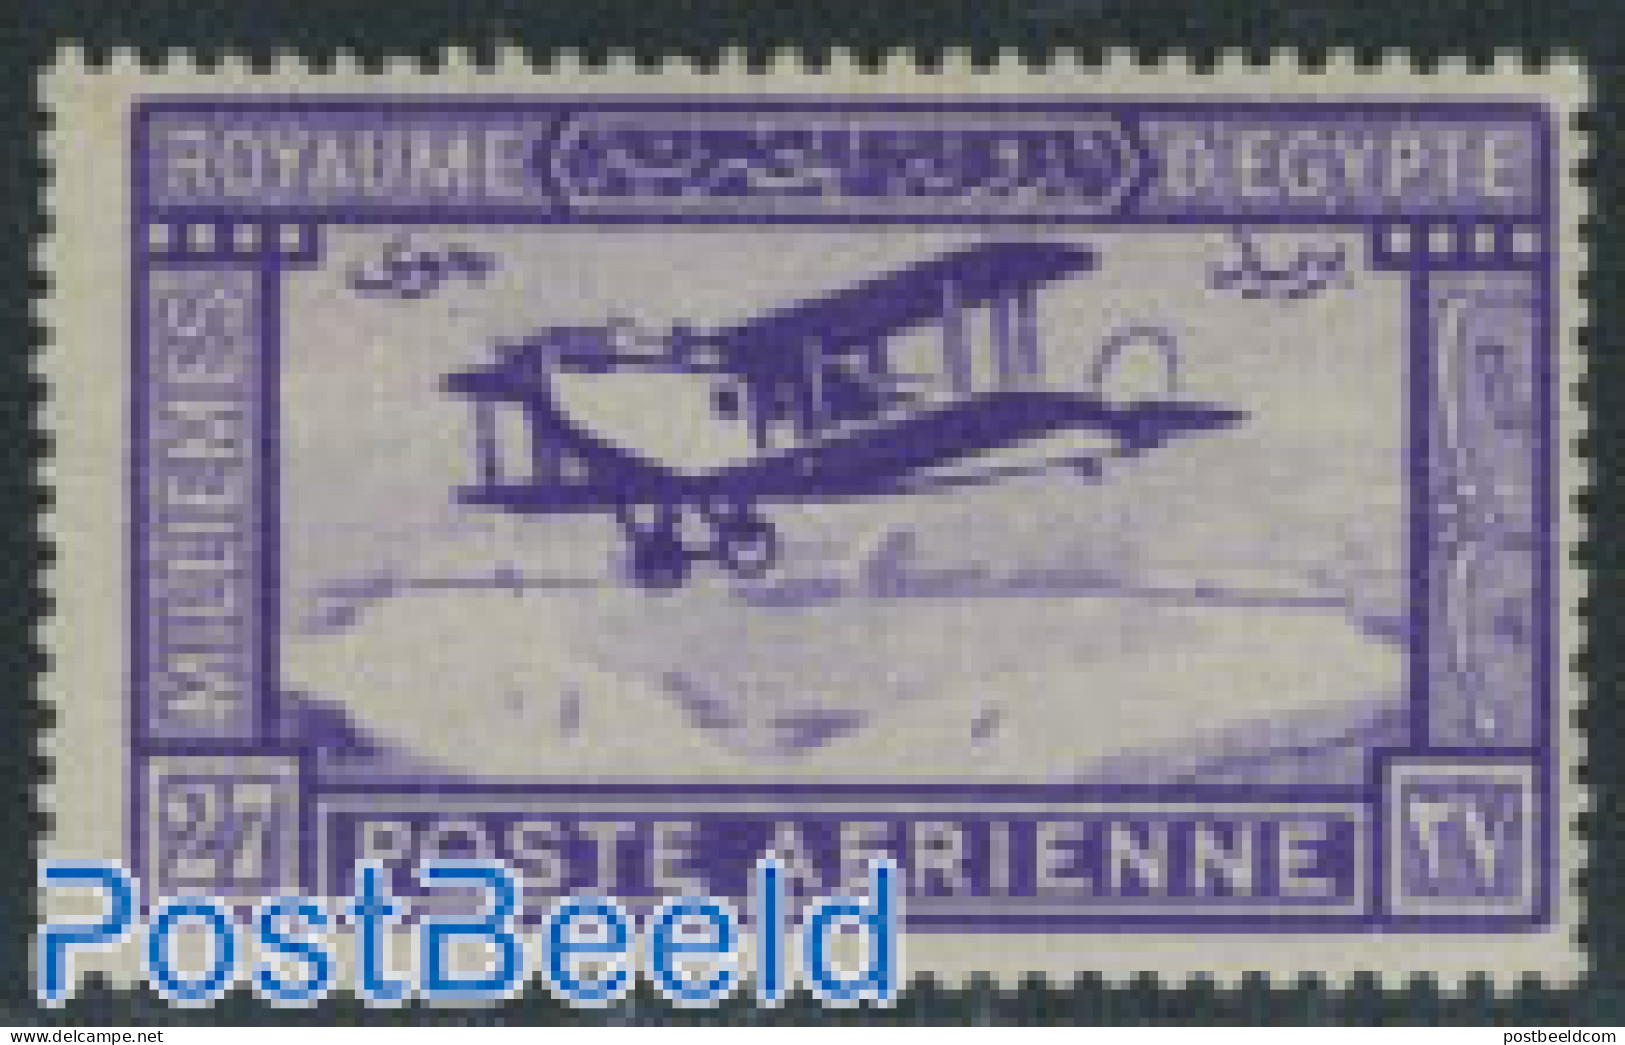 Egypt (Kingdom) 1926 Cairo-Bagdad Air Connection 1v, Unused (hinged), Transport - Aircraft & Aviation - Neufs